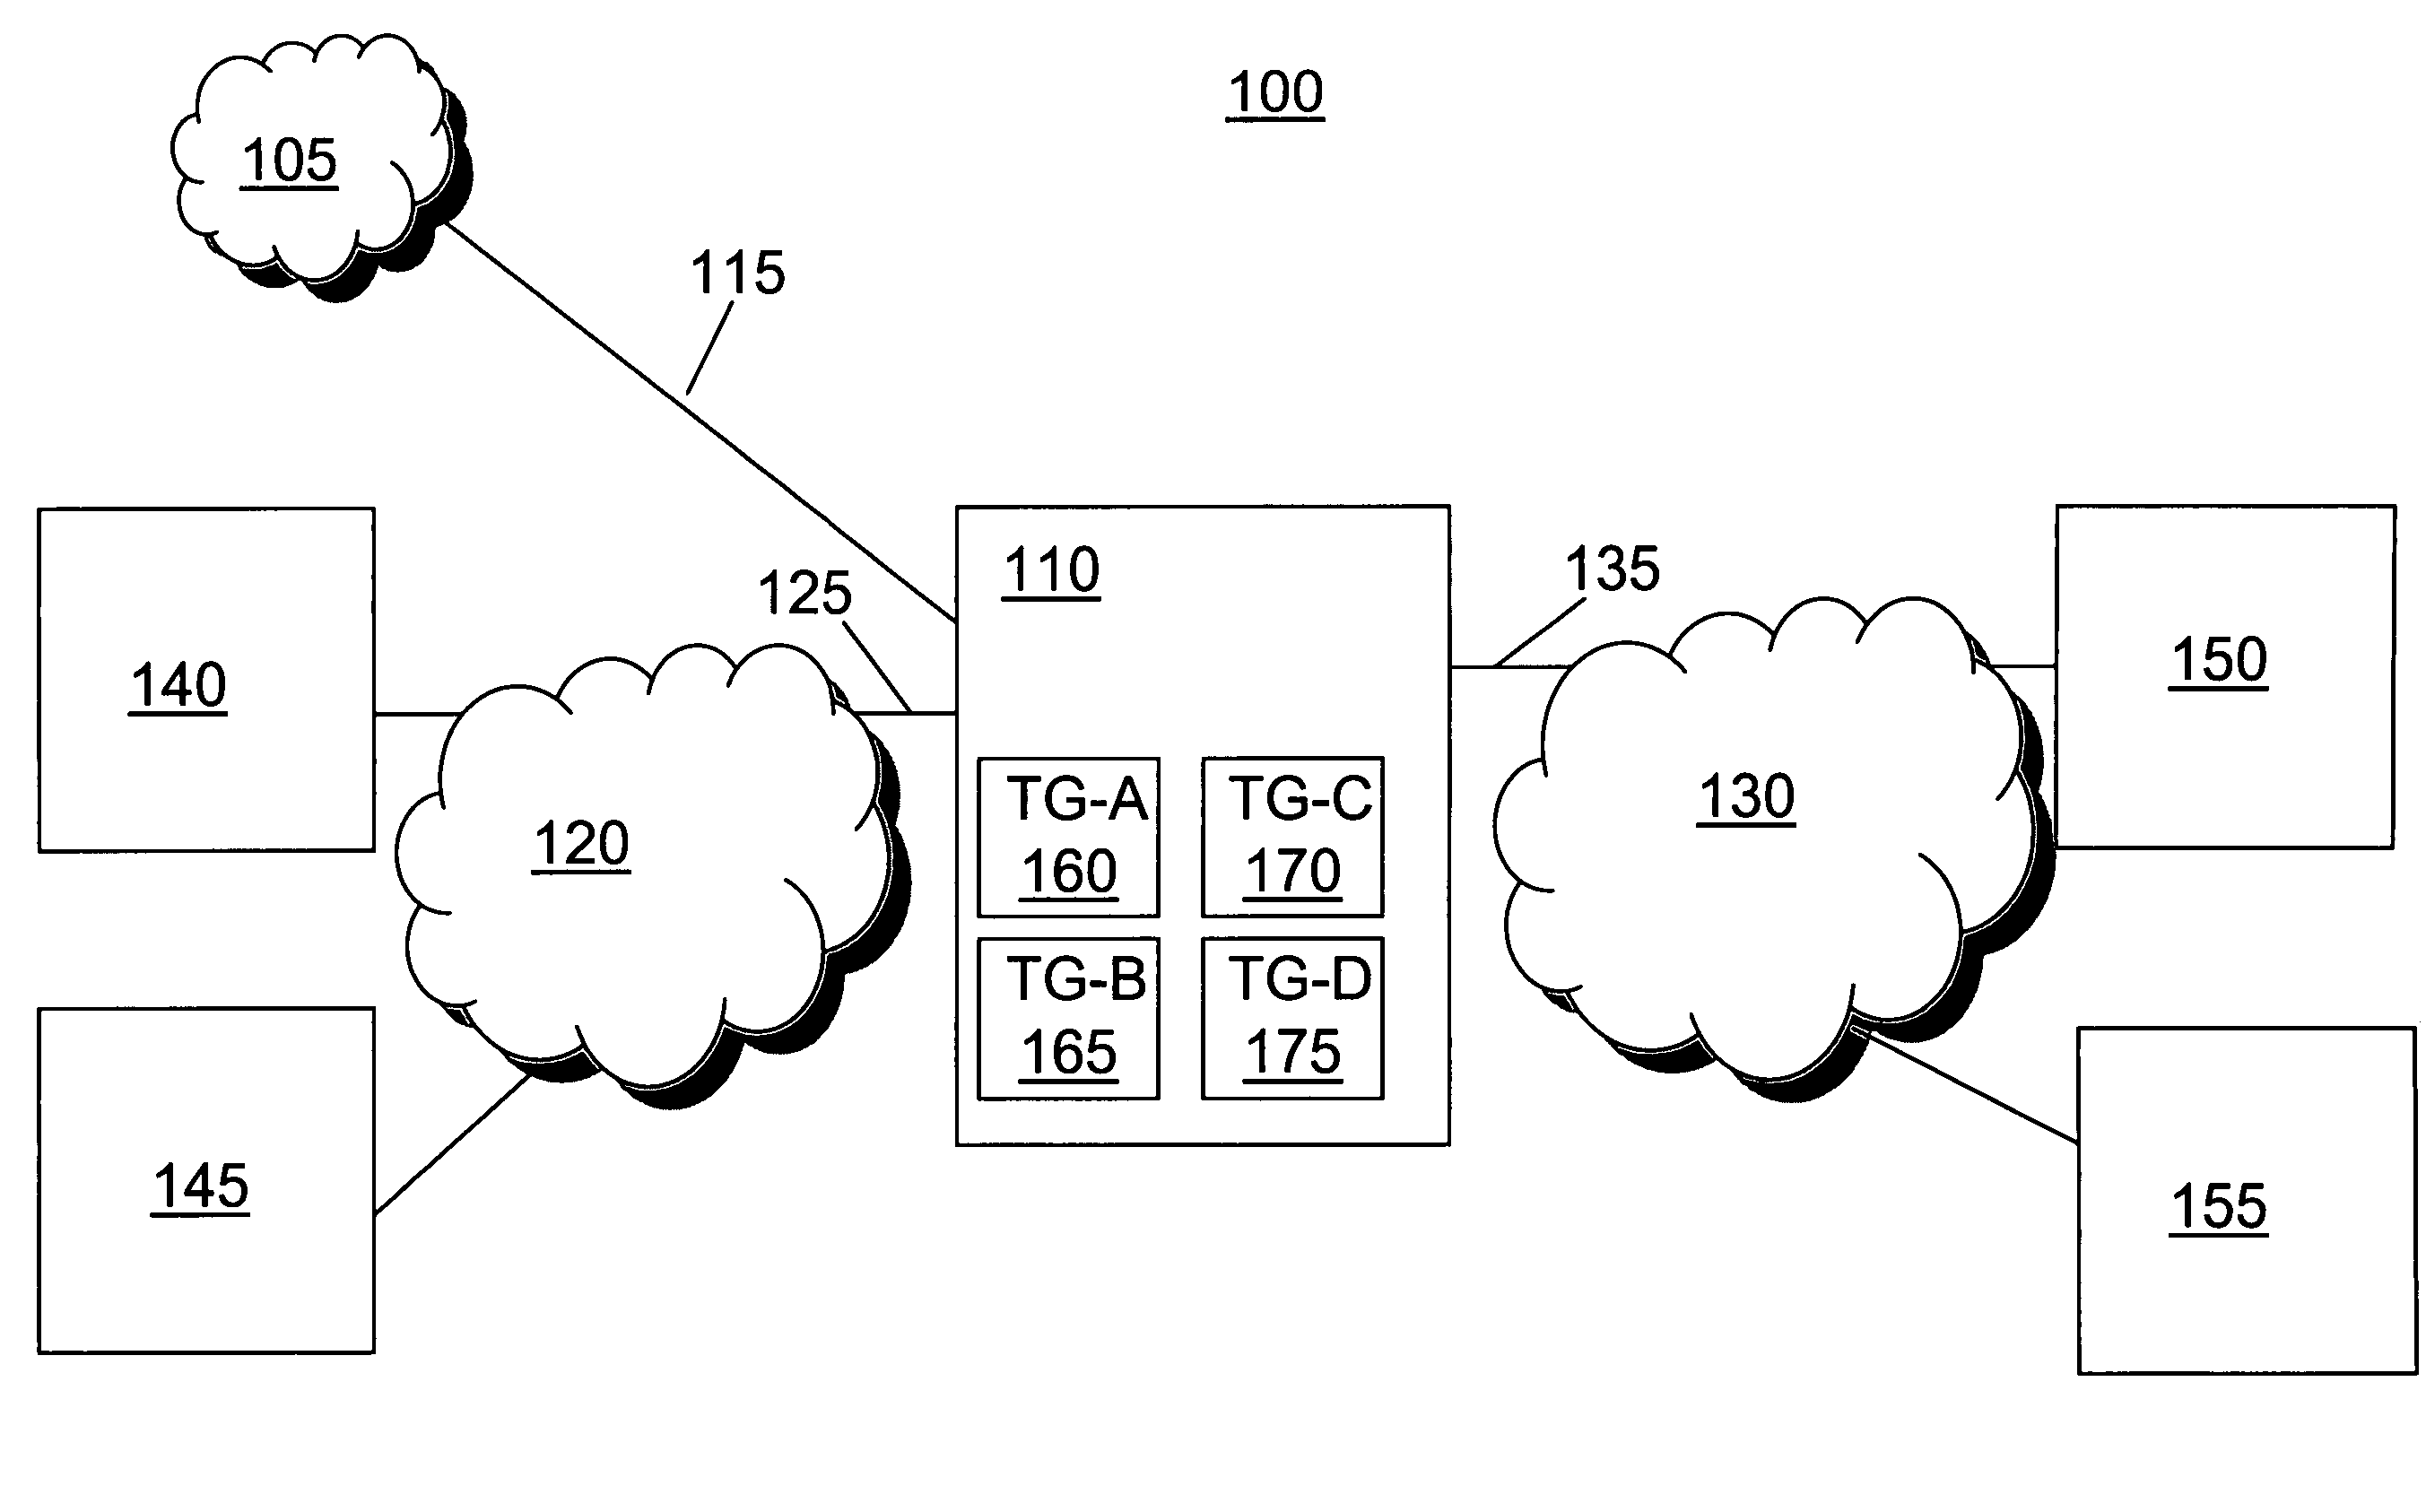 Controlling time-sensitive data in a packet-based network